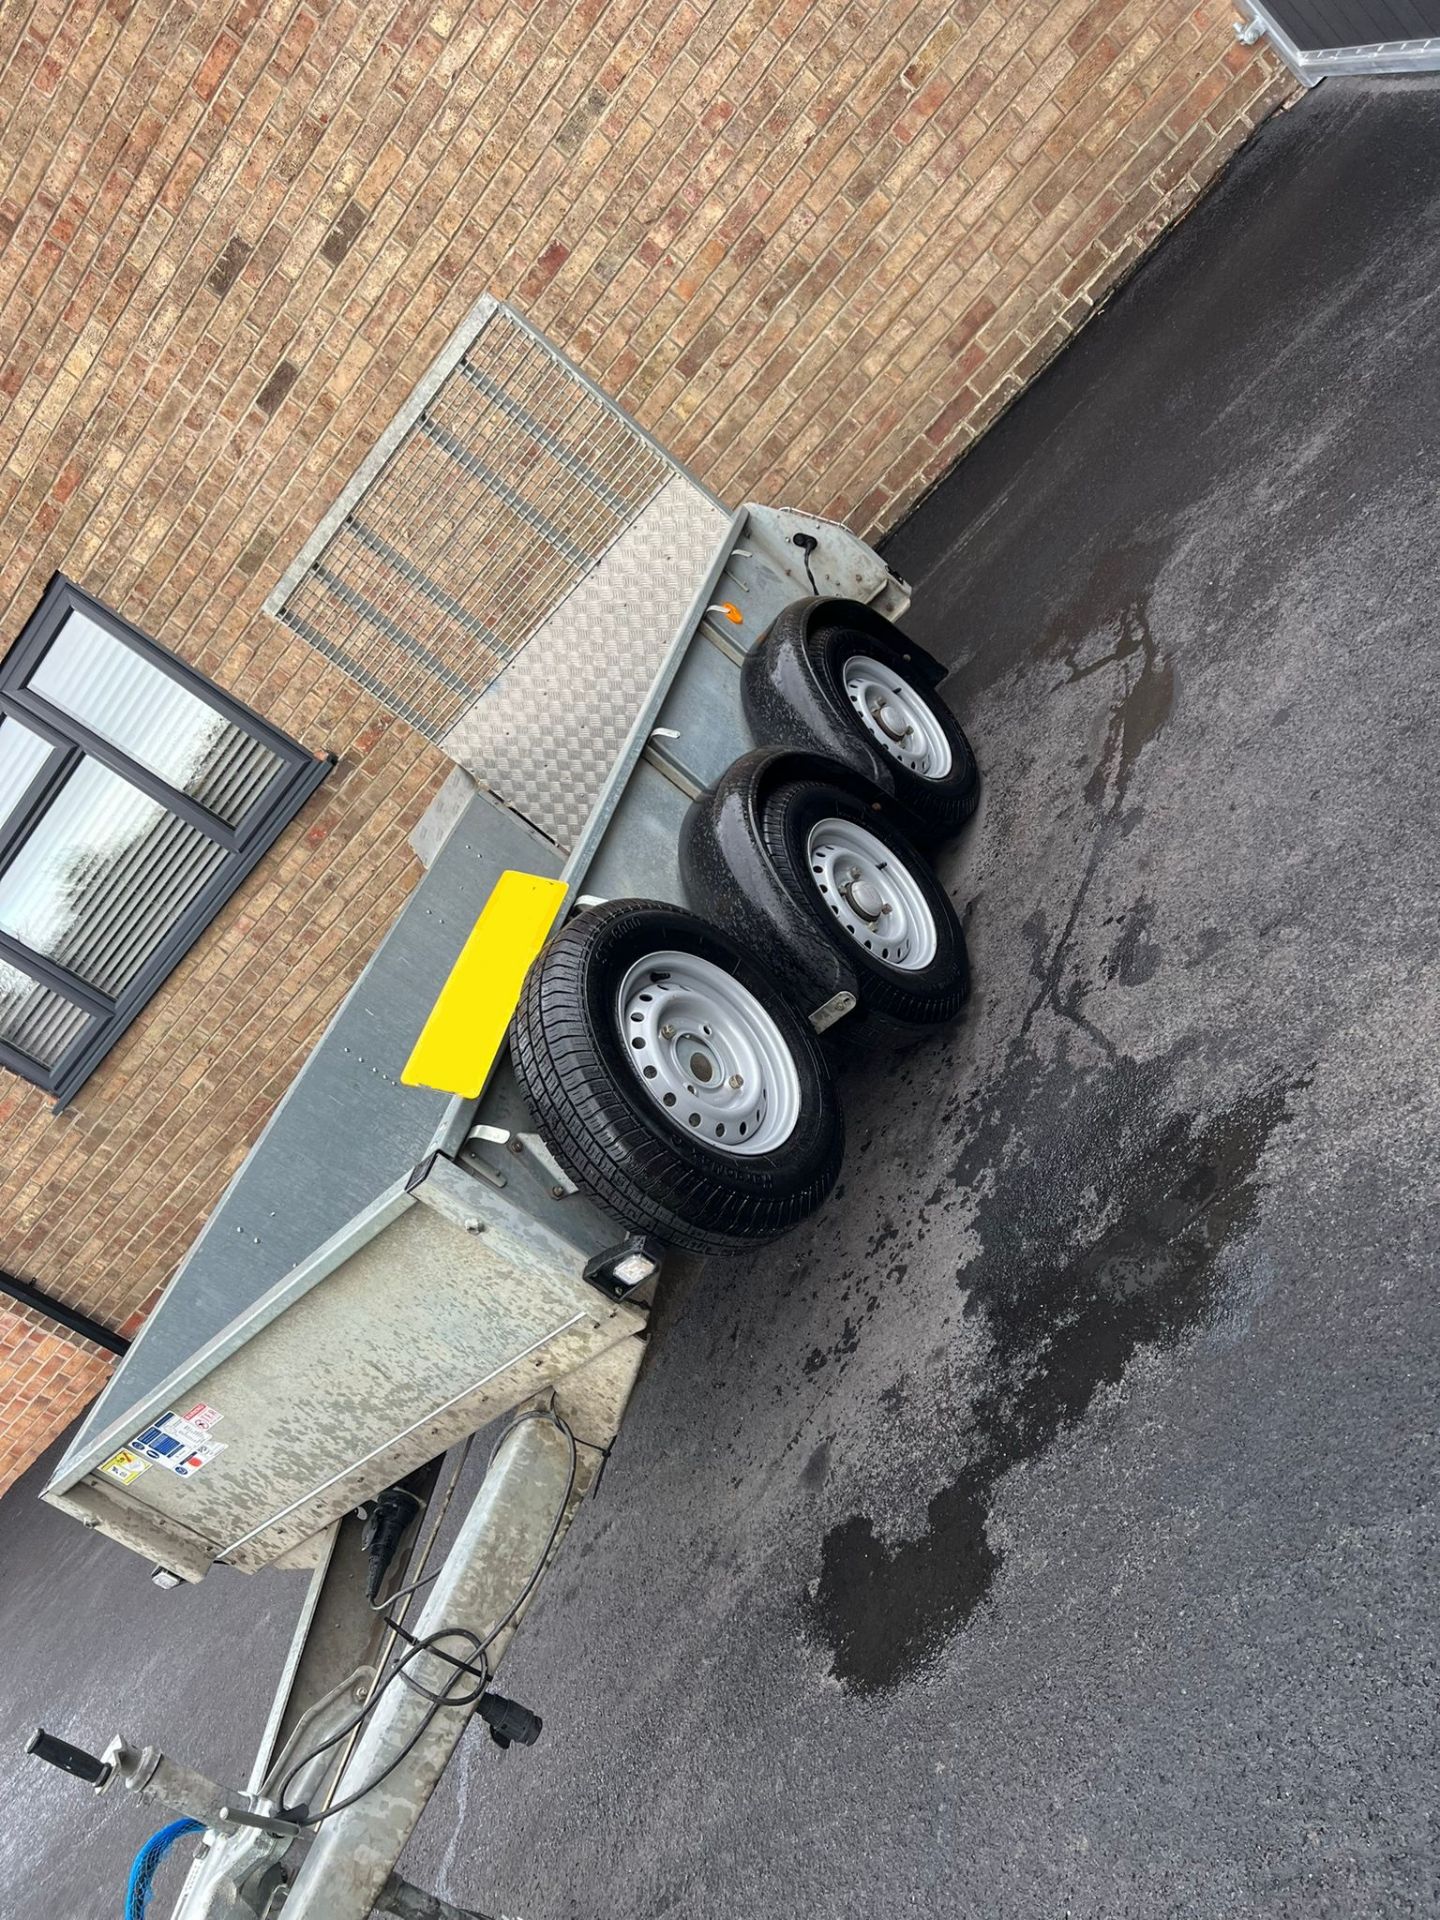 Ifor Williams GD84 Trailer - Year 2018 - Drop down ramp - good tyres all around - Image 4 of 10